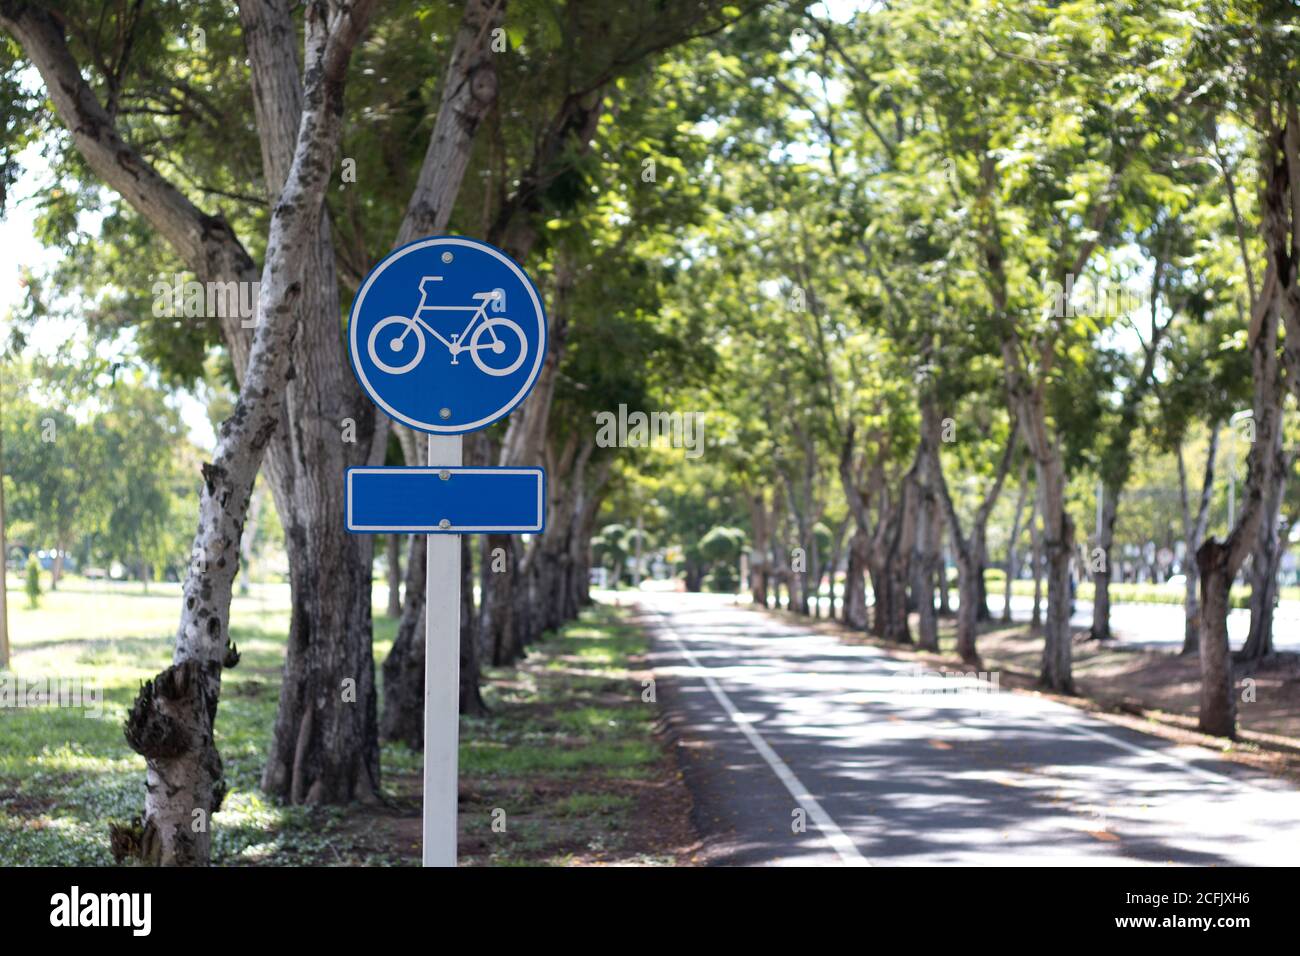 Signboard showing bike lane in a park. Stock Photo